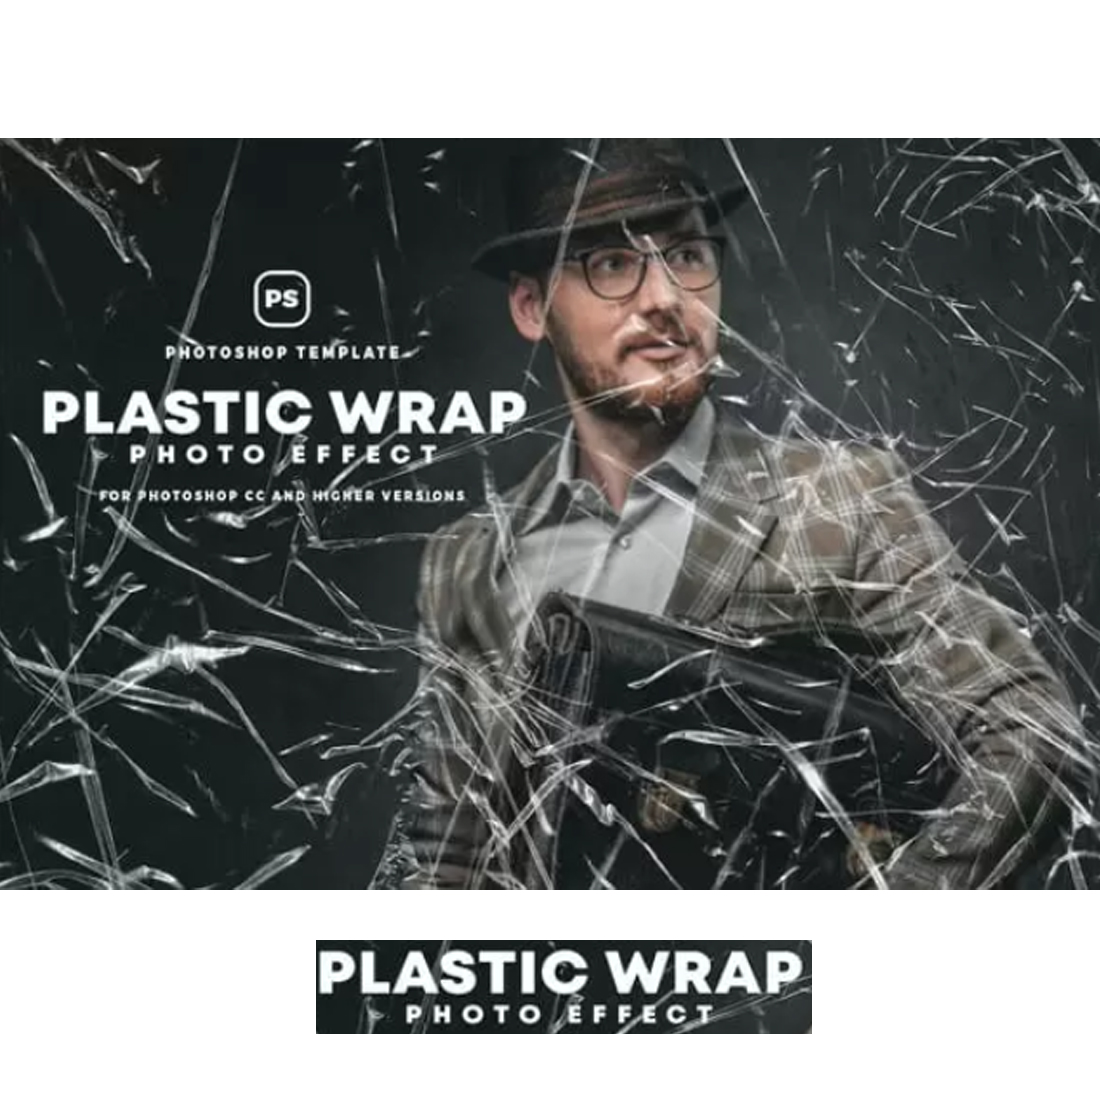 Plastic Wrap Photo Effects - Photoshop Action cover image.